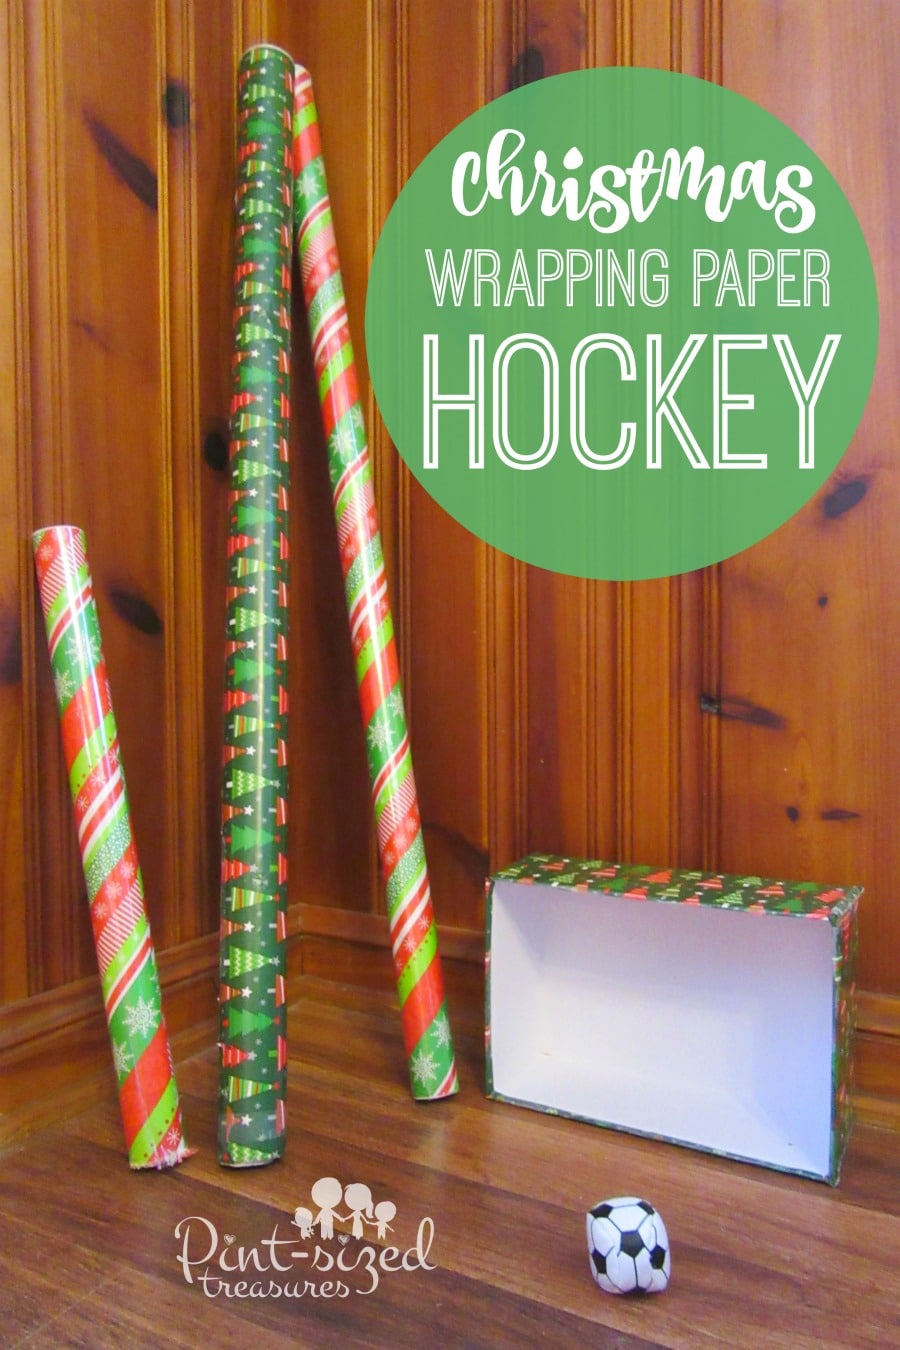 Christmas wrapping paper hockey game